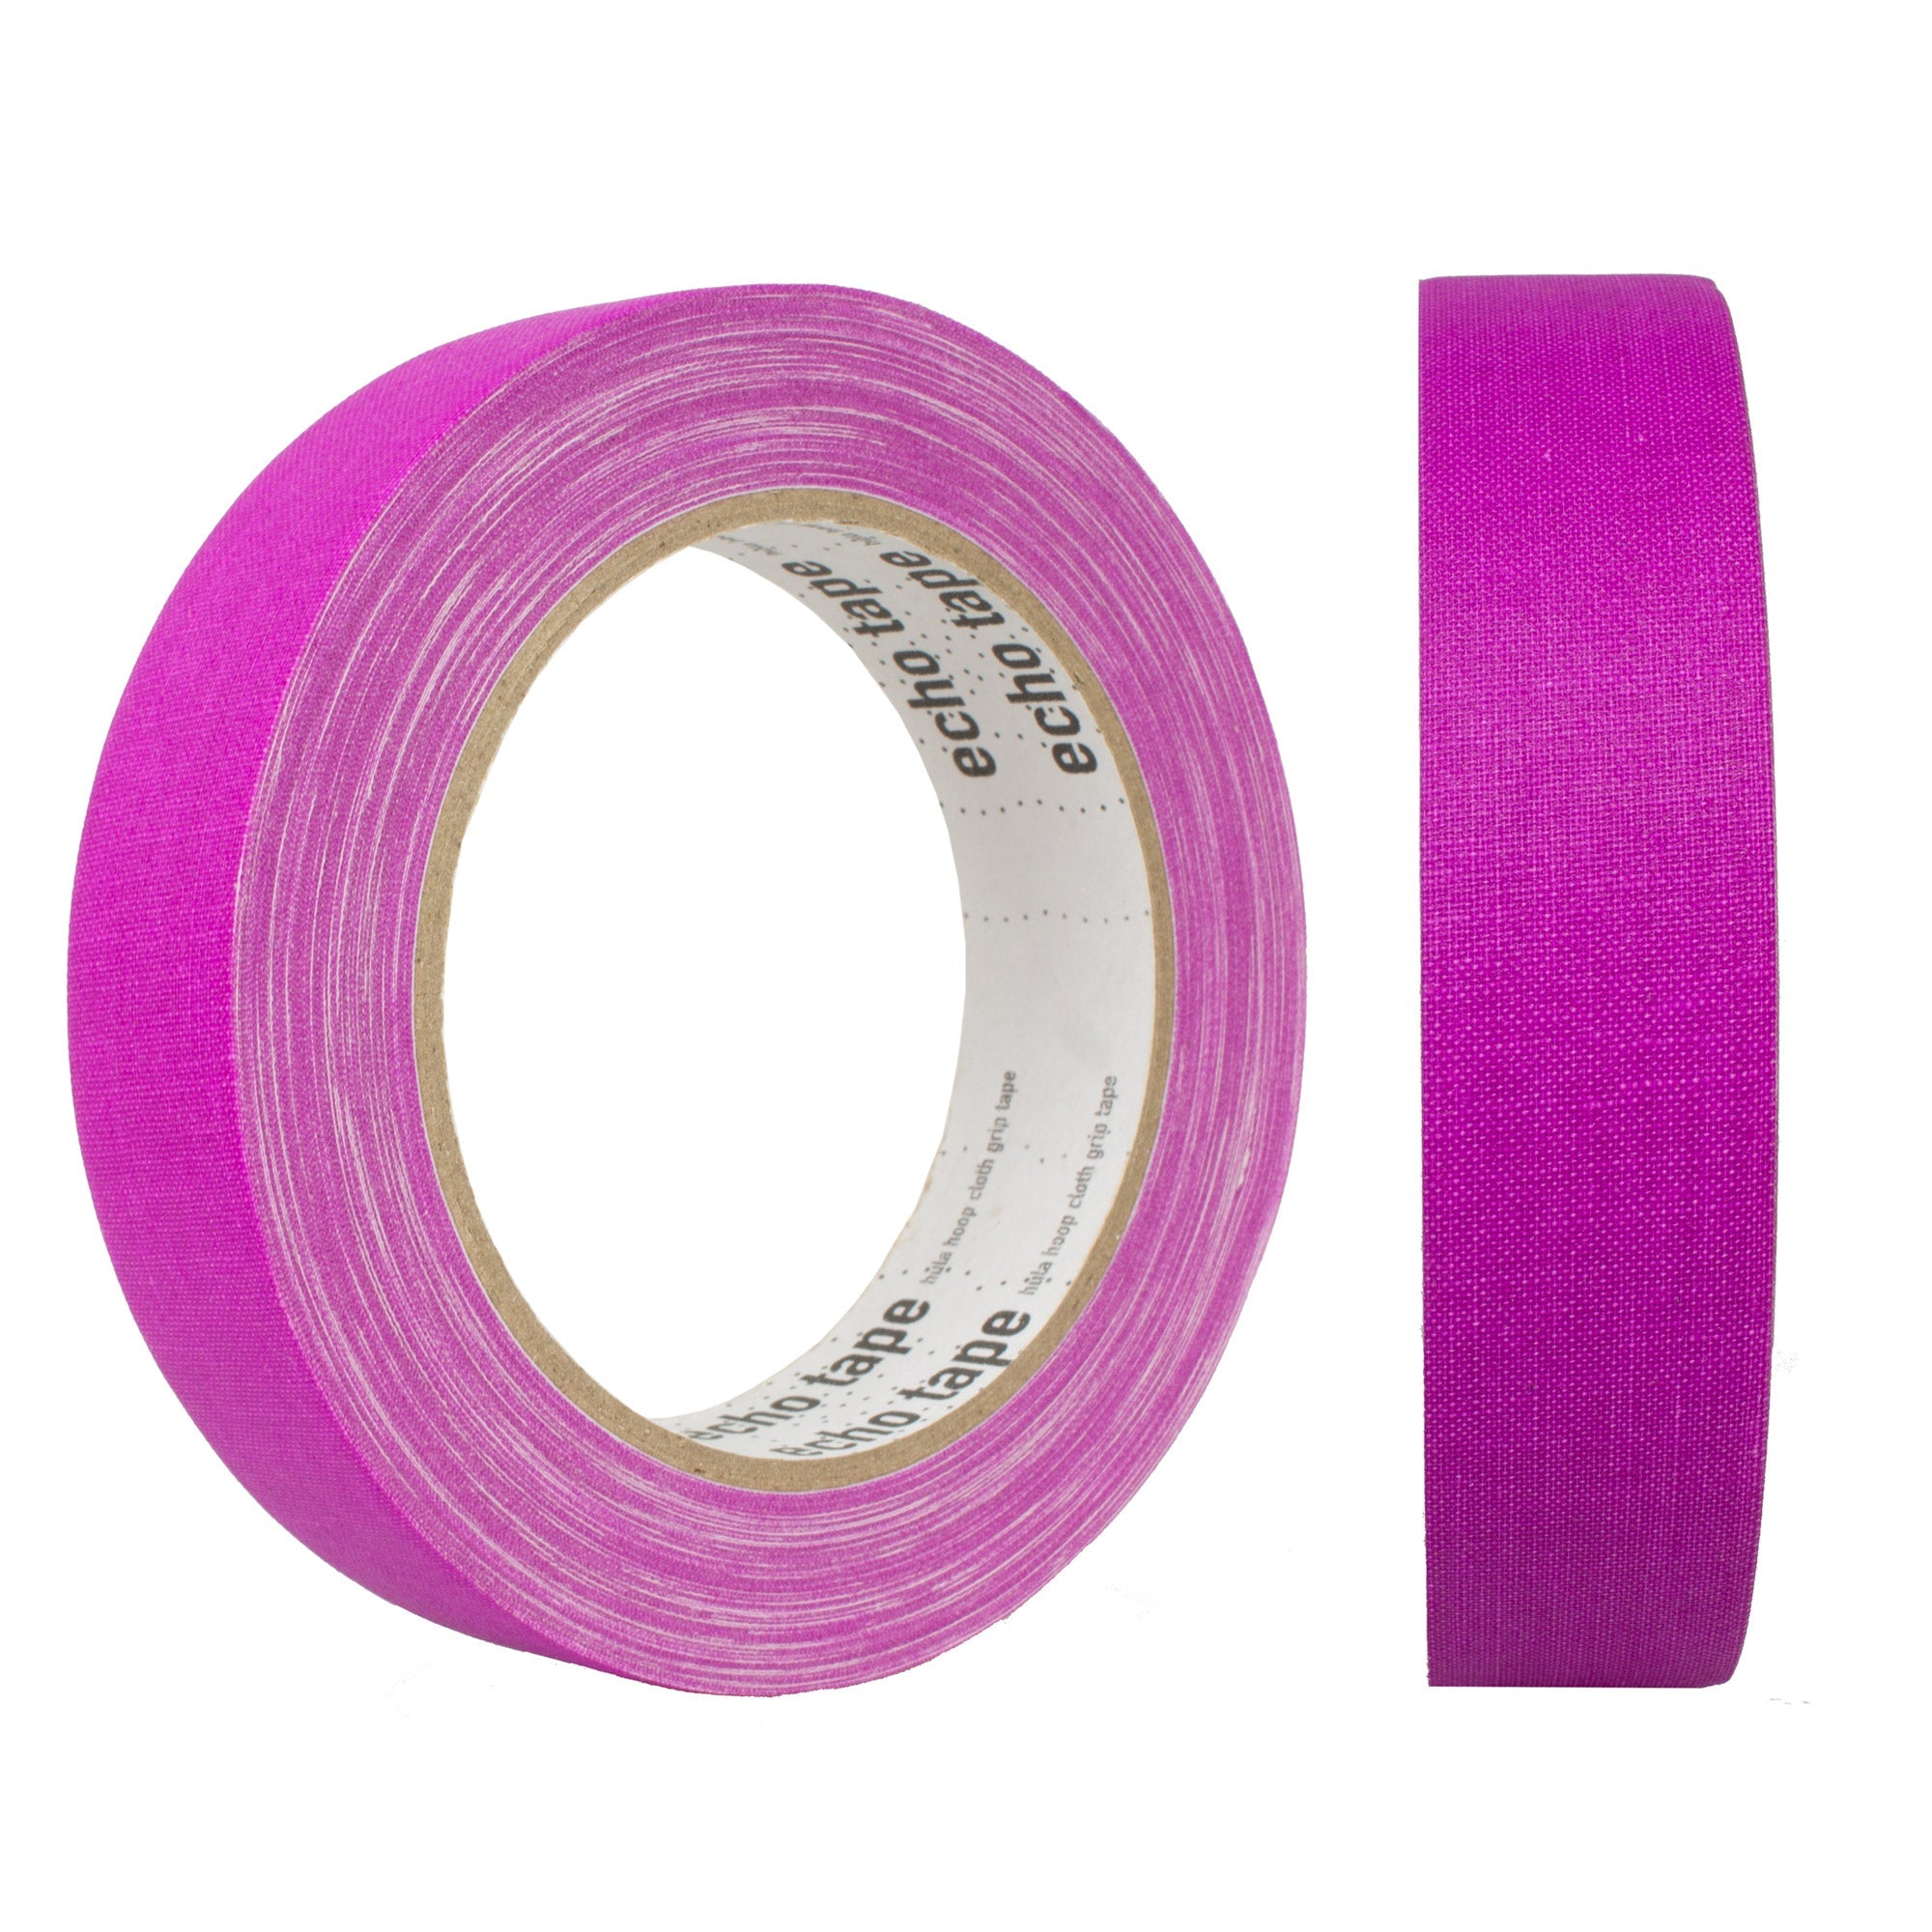 a roll of purple tape from two angles